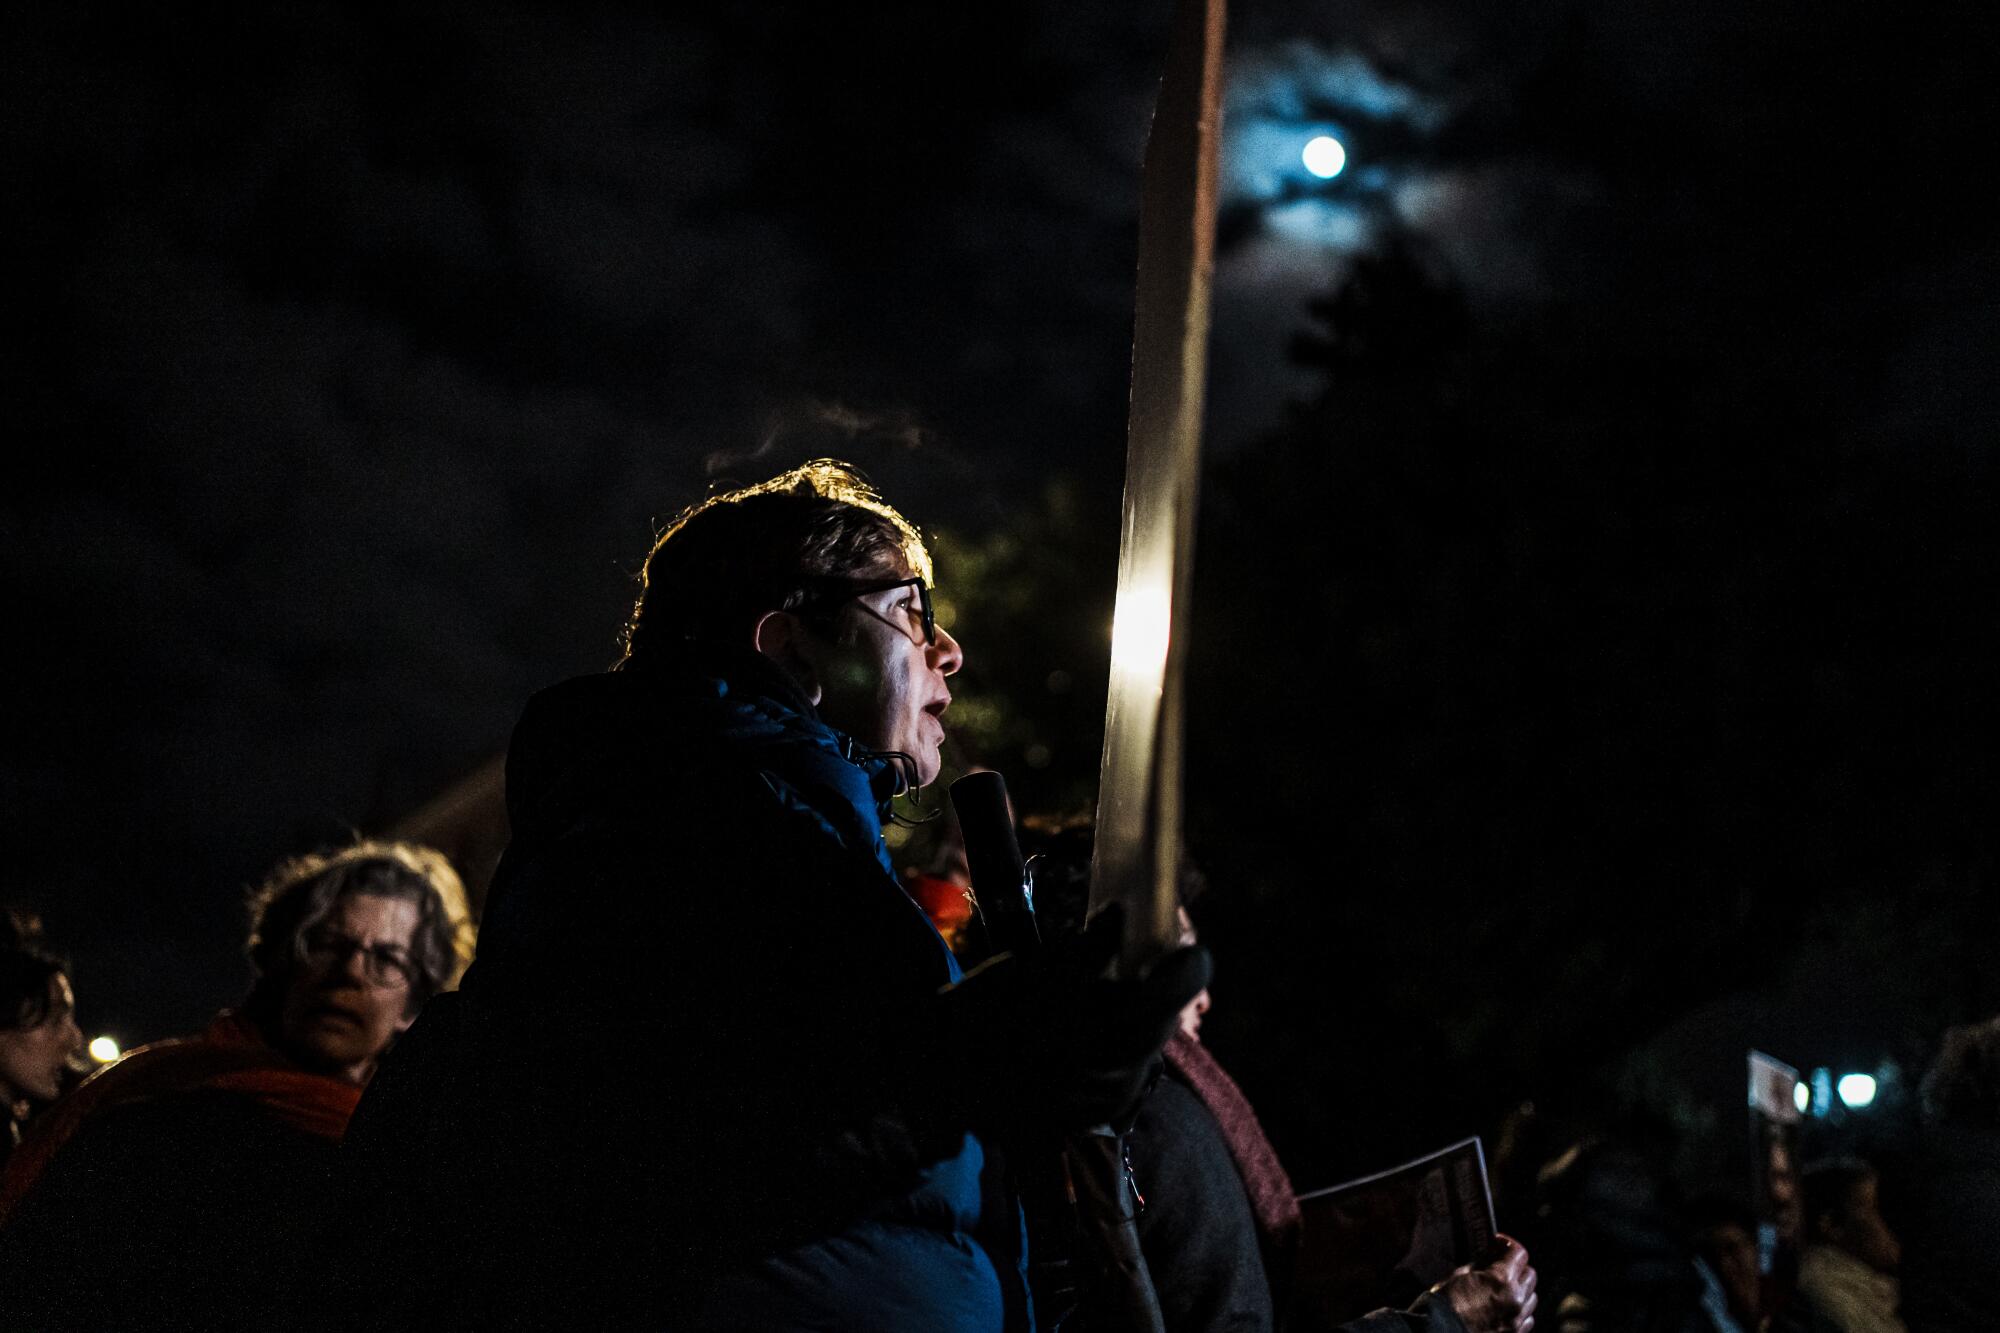 A woman joins others in protesting in the dark outside.